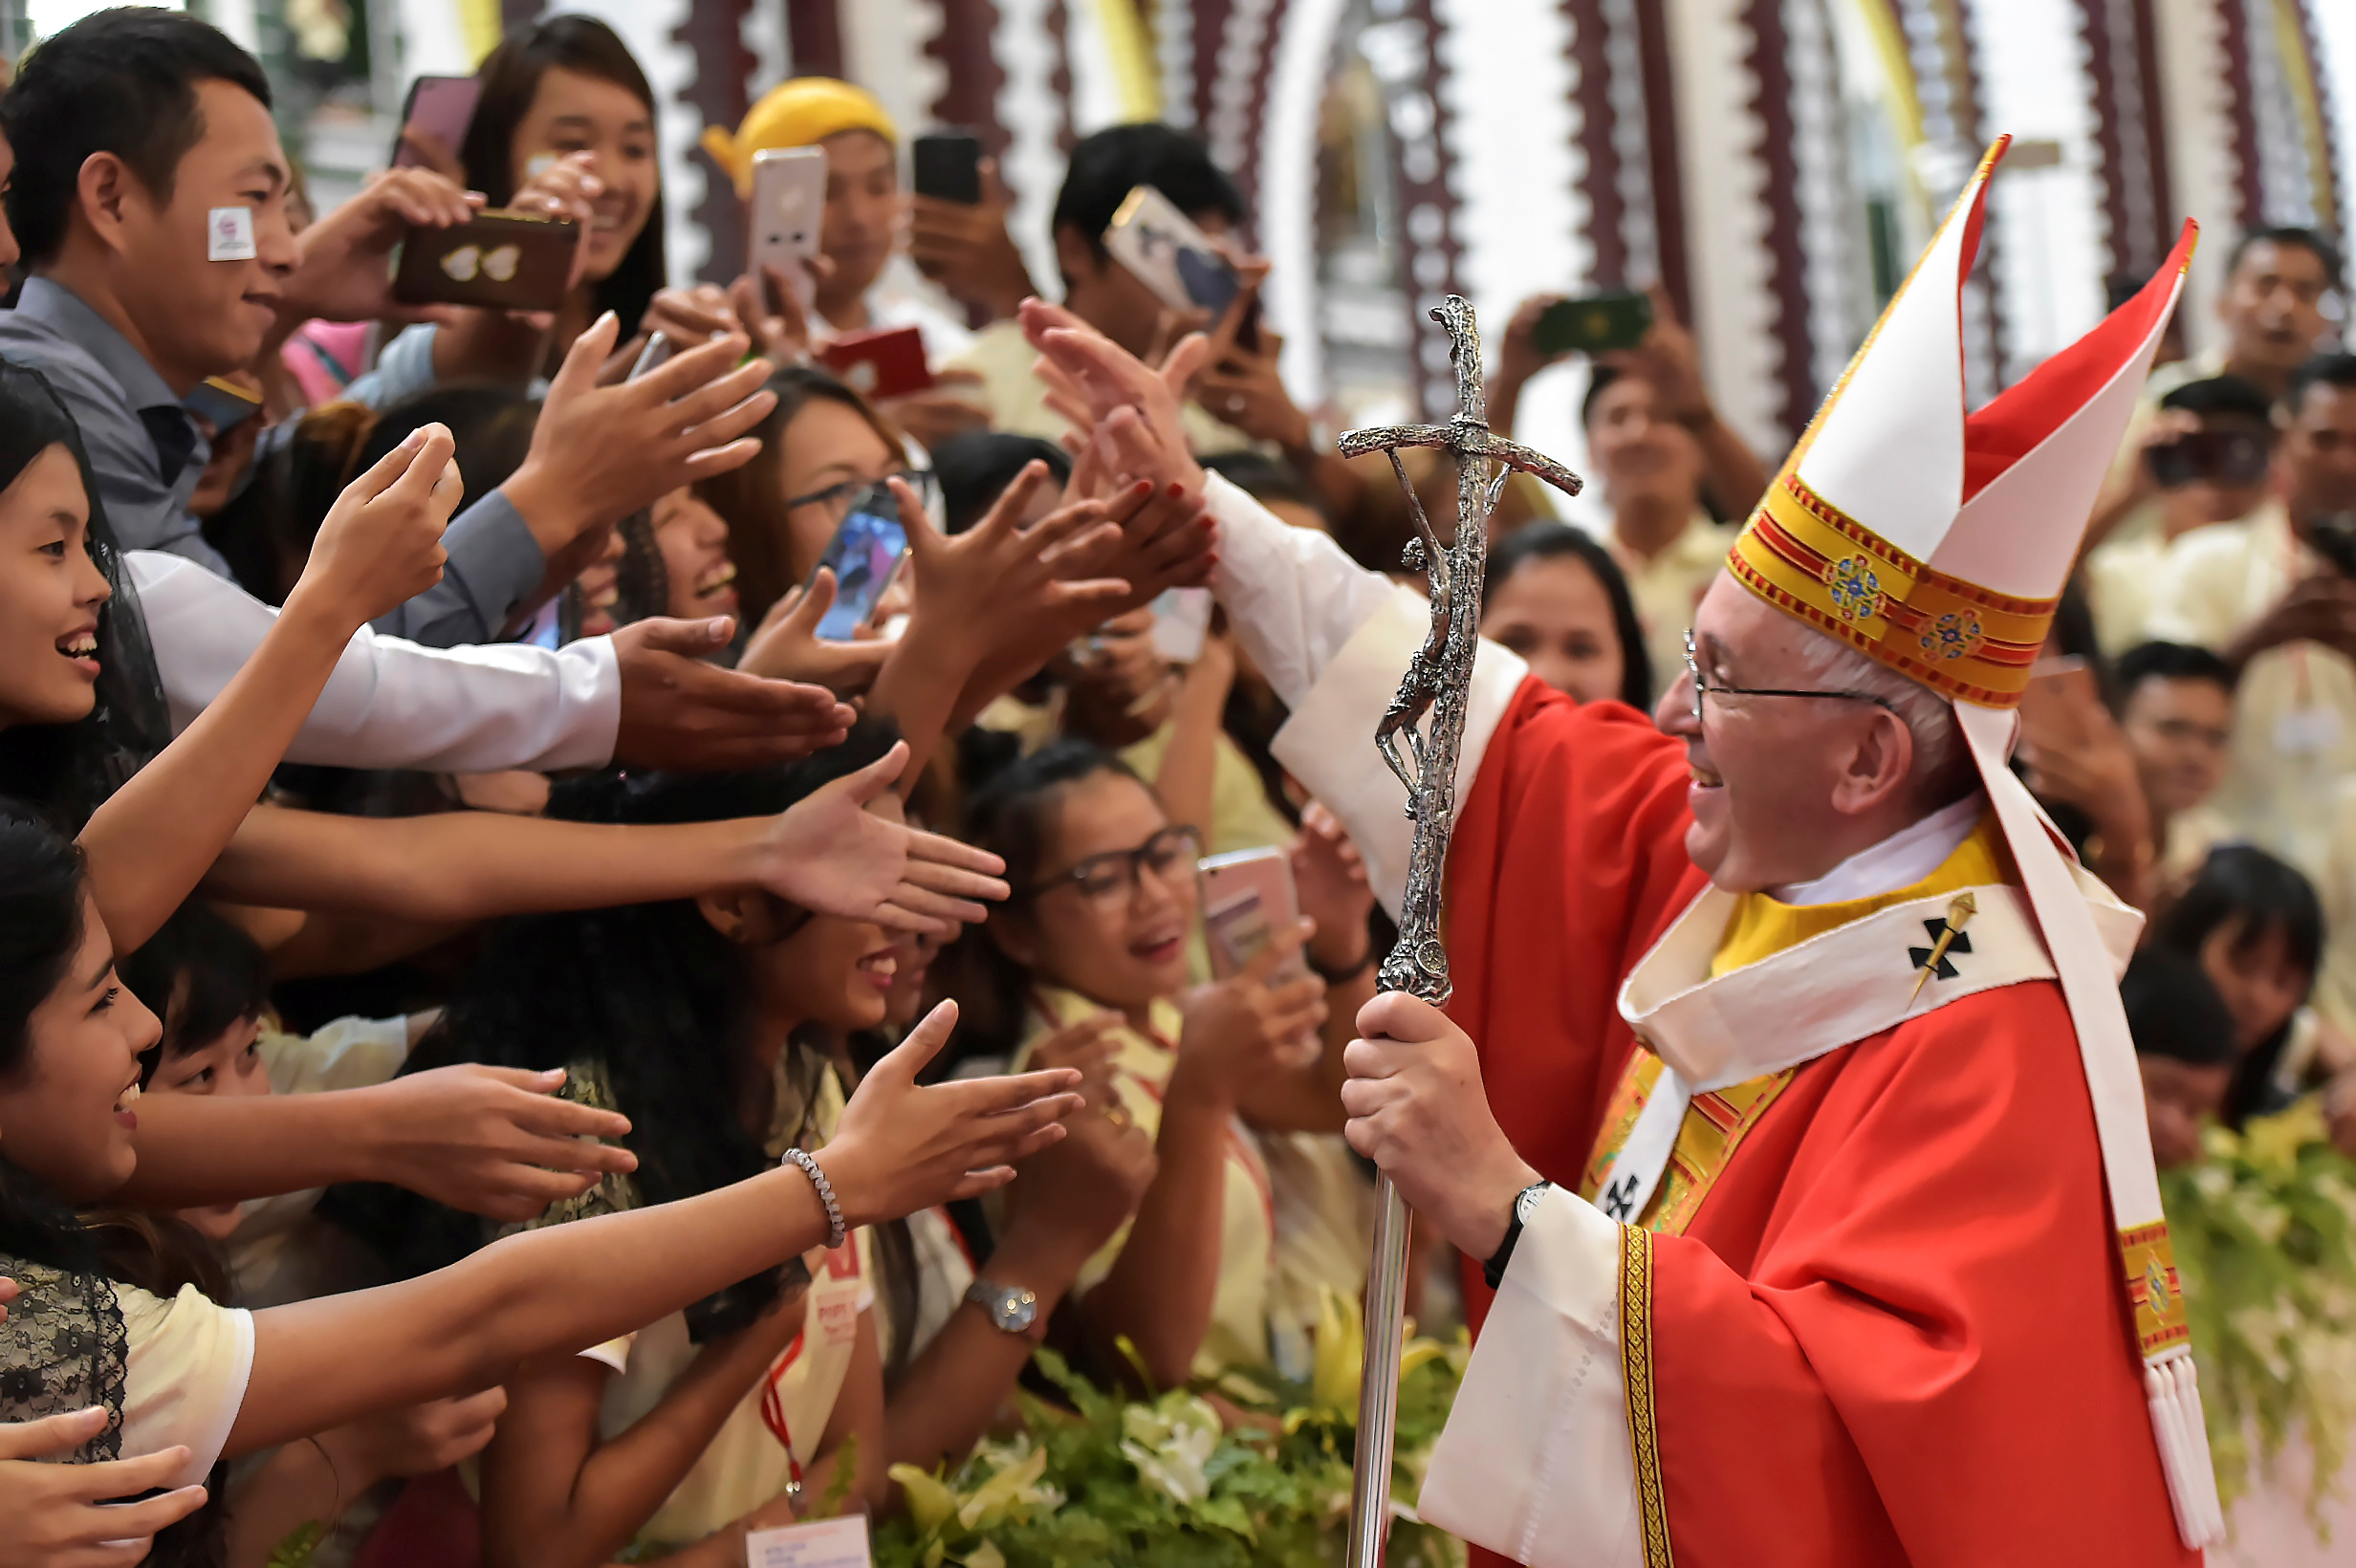 Pope Francis greets young people after celebrating Mass with youths Nov. 30 at St. Mary's Cathedral in Yangon, Myanmar. Foreign trips, a focus on the rights and needs of migrants and refugees and a Synod of Bishops dedicated to young people all are on the 2018 calendar for Pope Francis. (CNS photo/L'Osservatore Romano via Reuters) See VATICAN-LETTER-POPE-2018 Dec. 20, 2017.